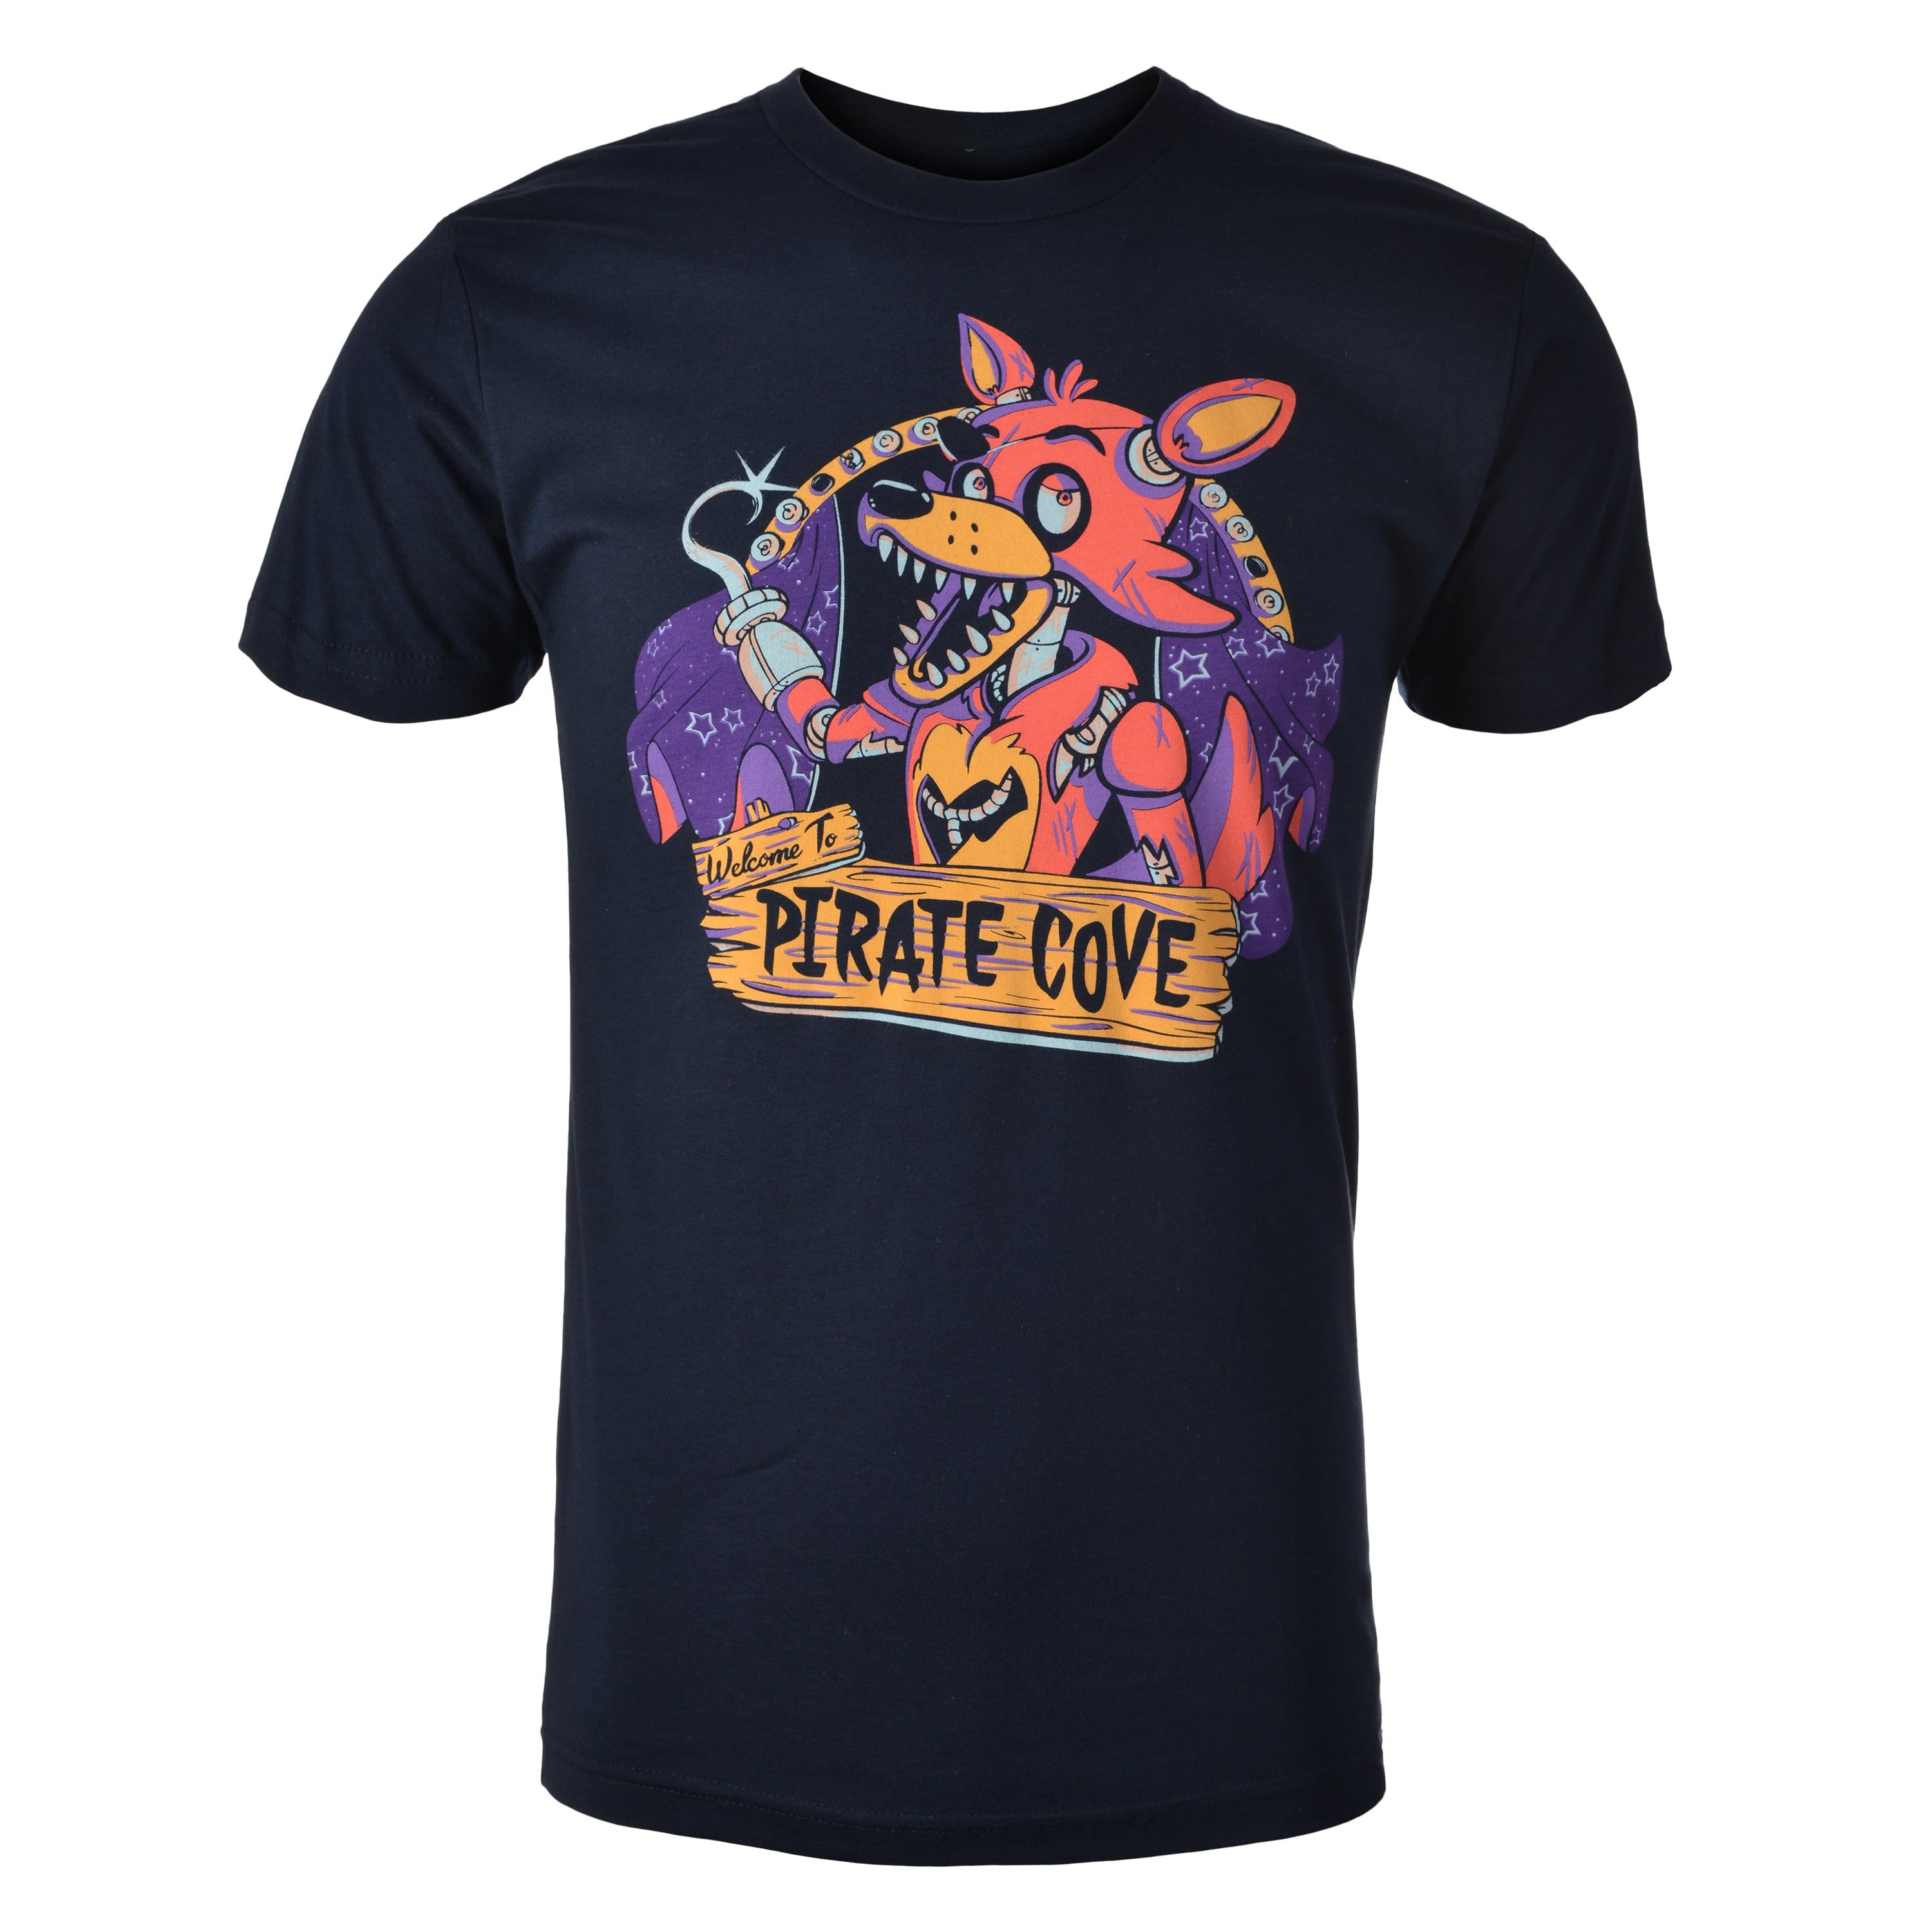 Five Nights at Freddy's - Pirate Cove Tee